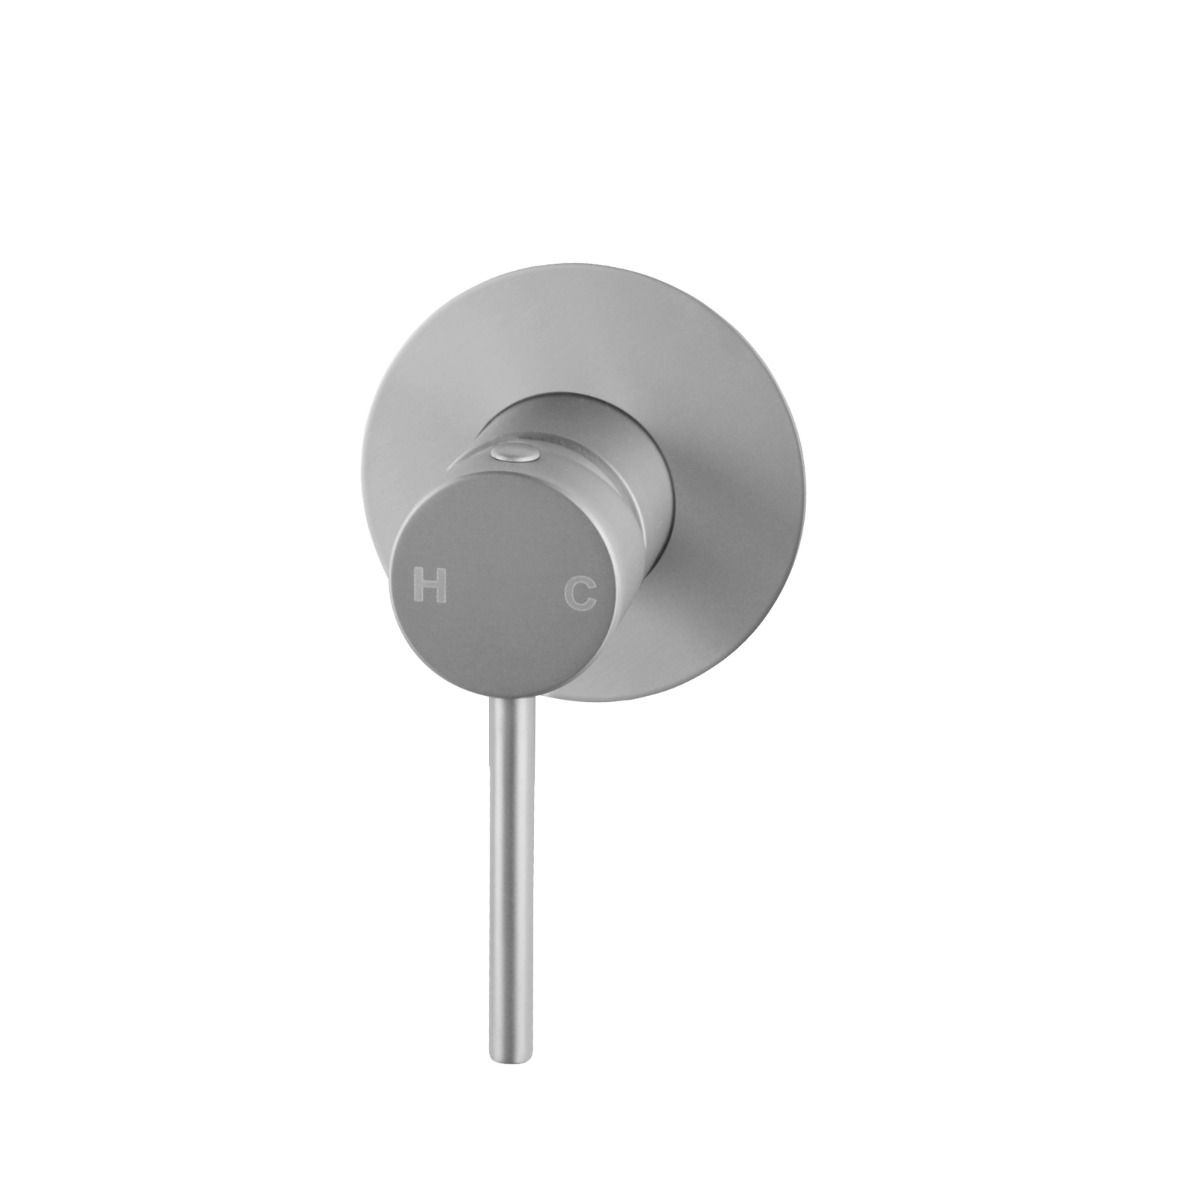 Pentro Brushed Nickel Round Shower Mixer with 65mm Thin Plate